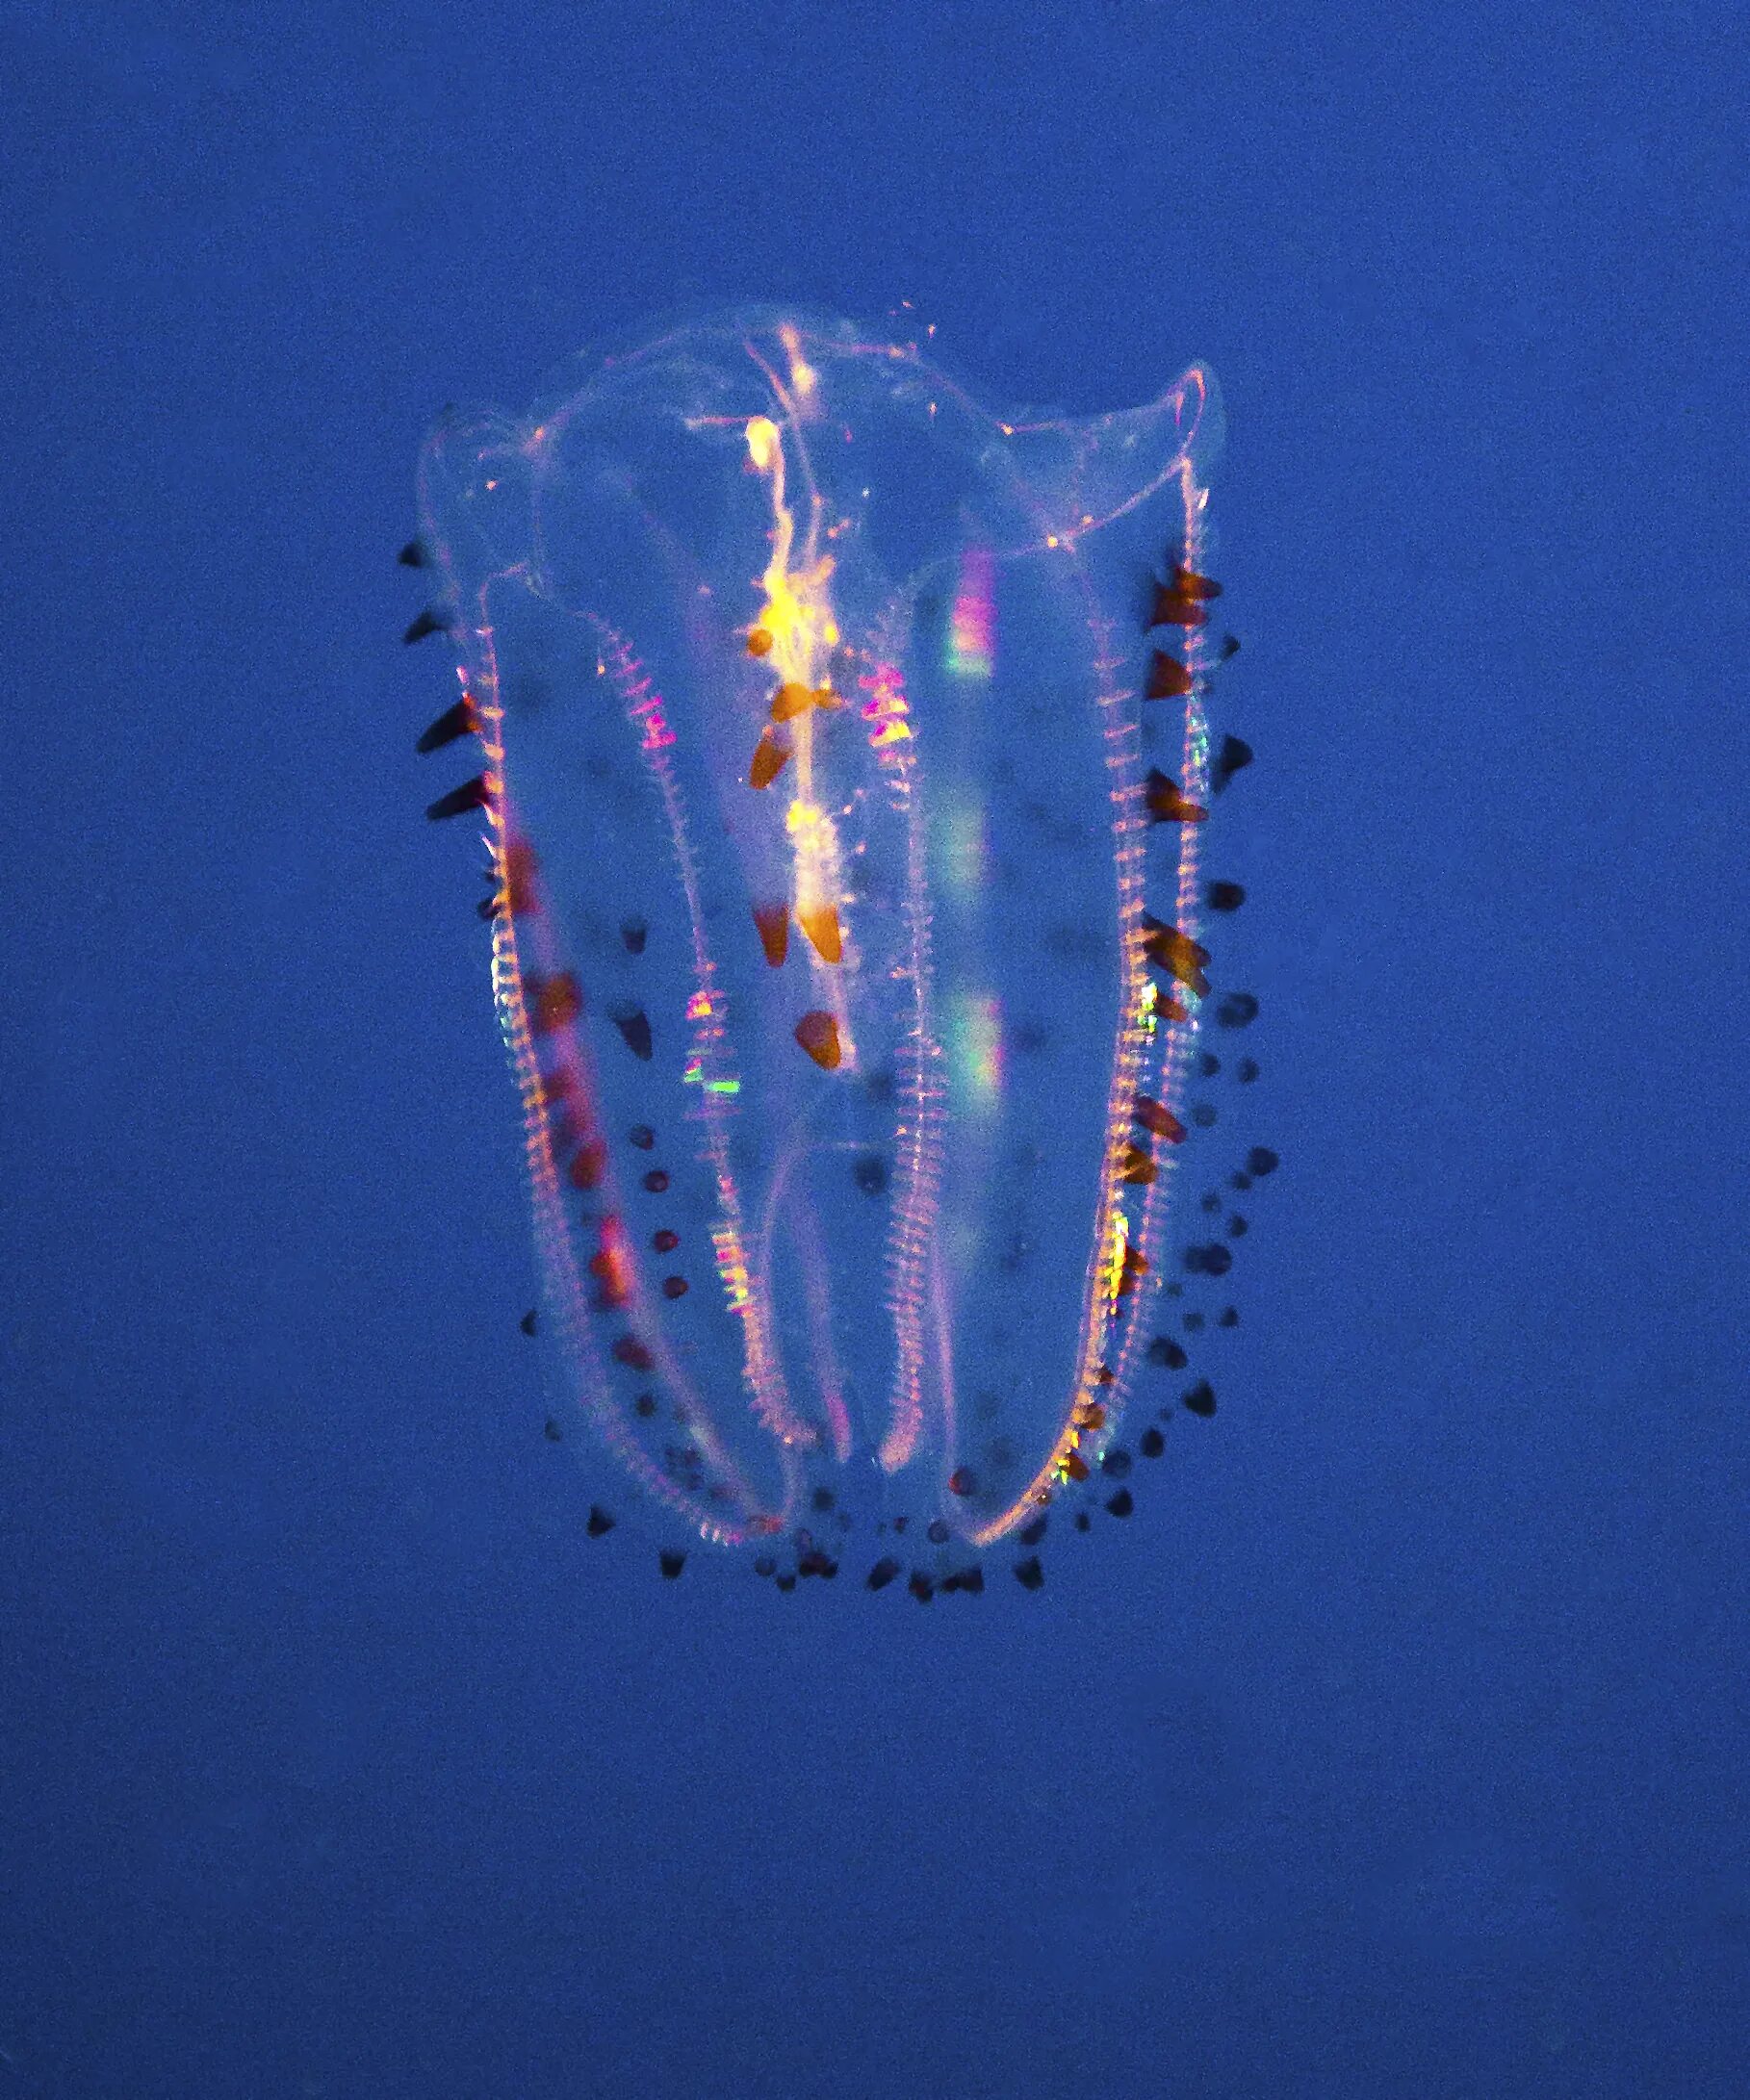 Comb jellies. Comb Jelly. Bloodbelly Comb Jelly. Rabbit-eared Comb Jelly. Jelly Comb cpo05118.